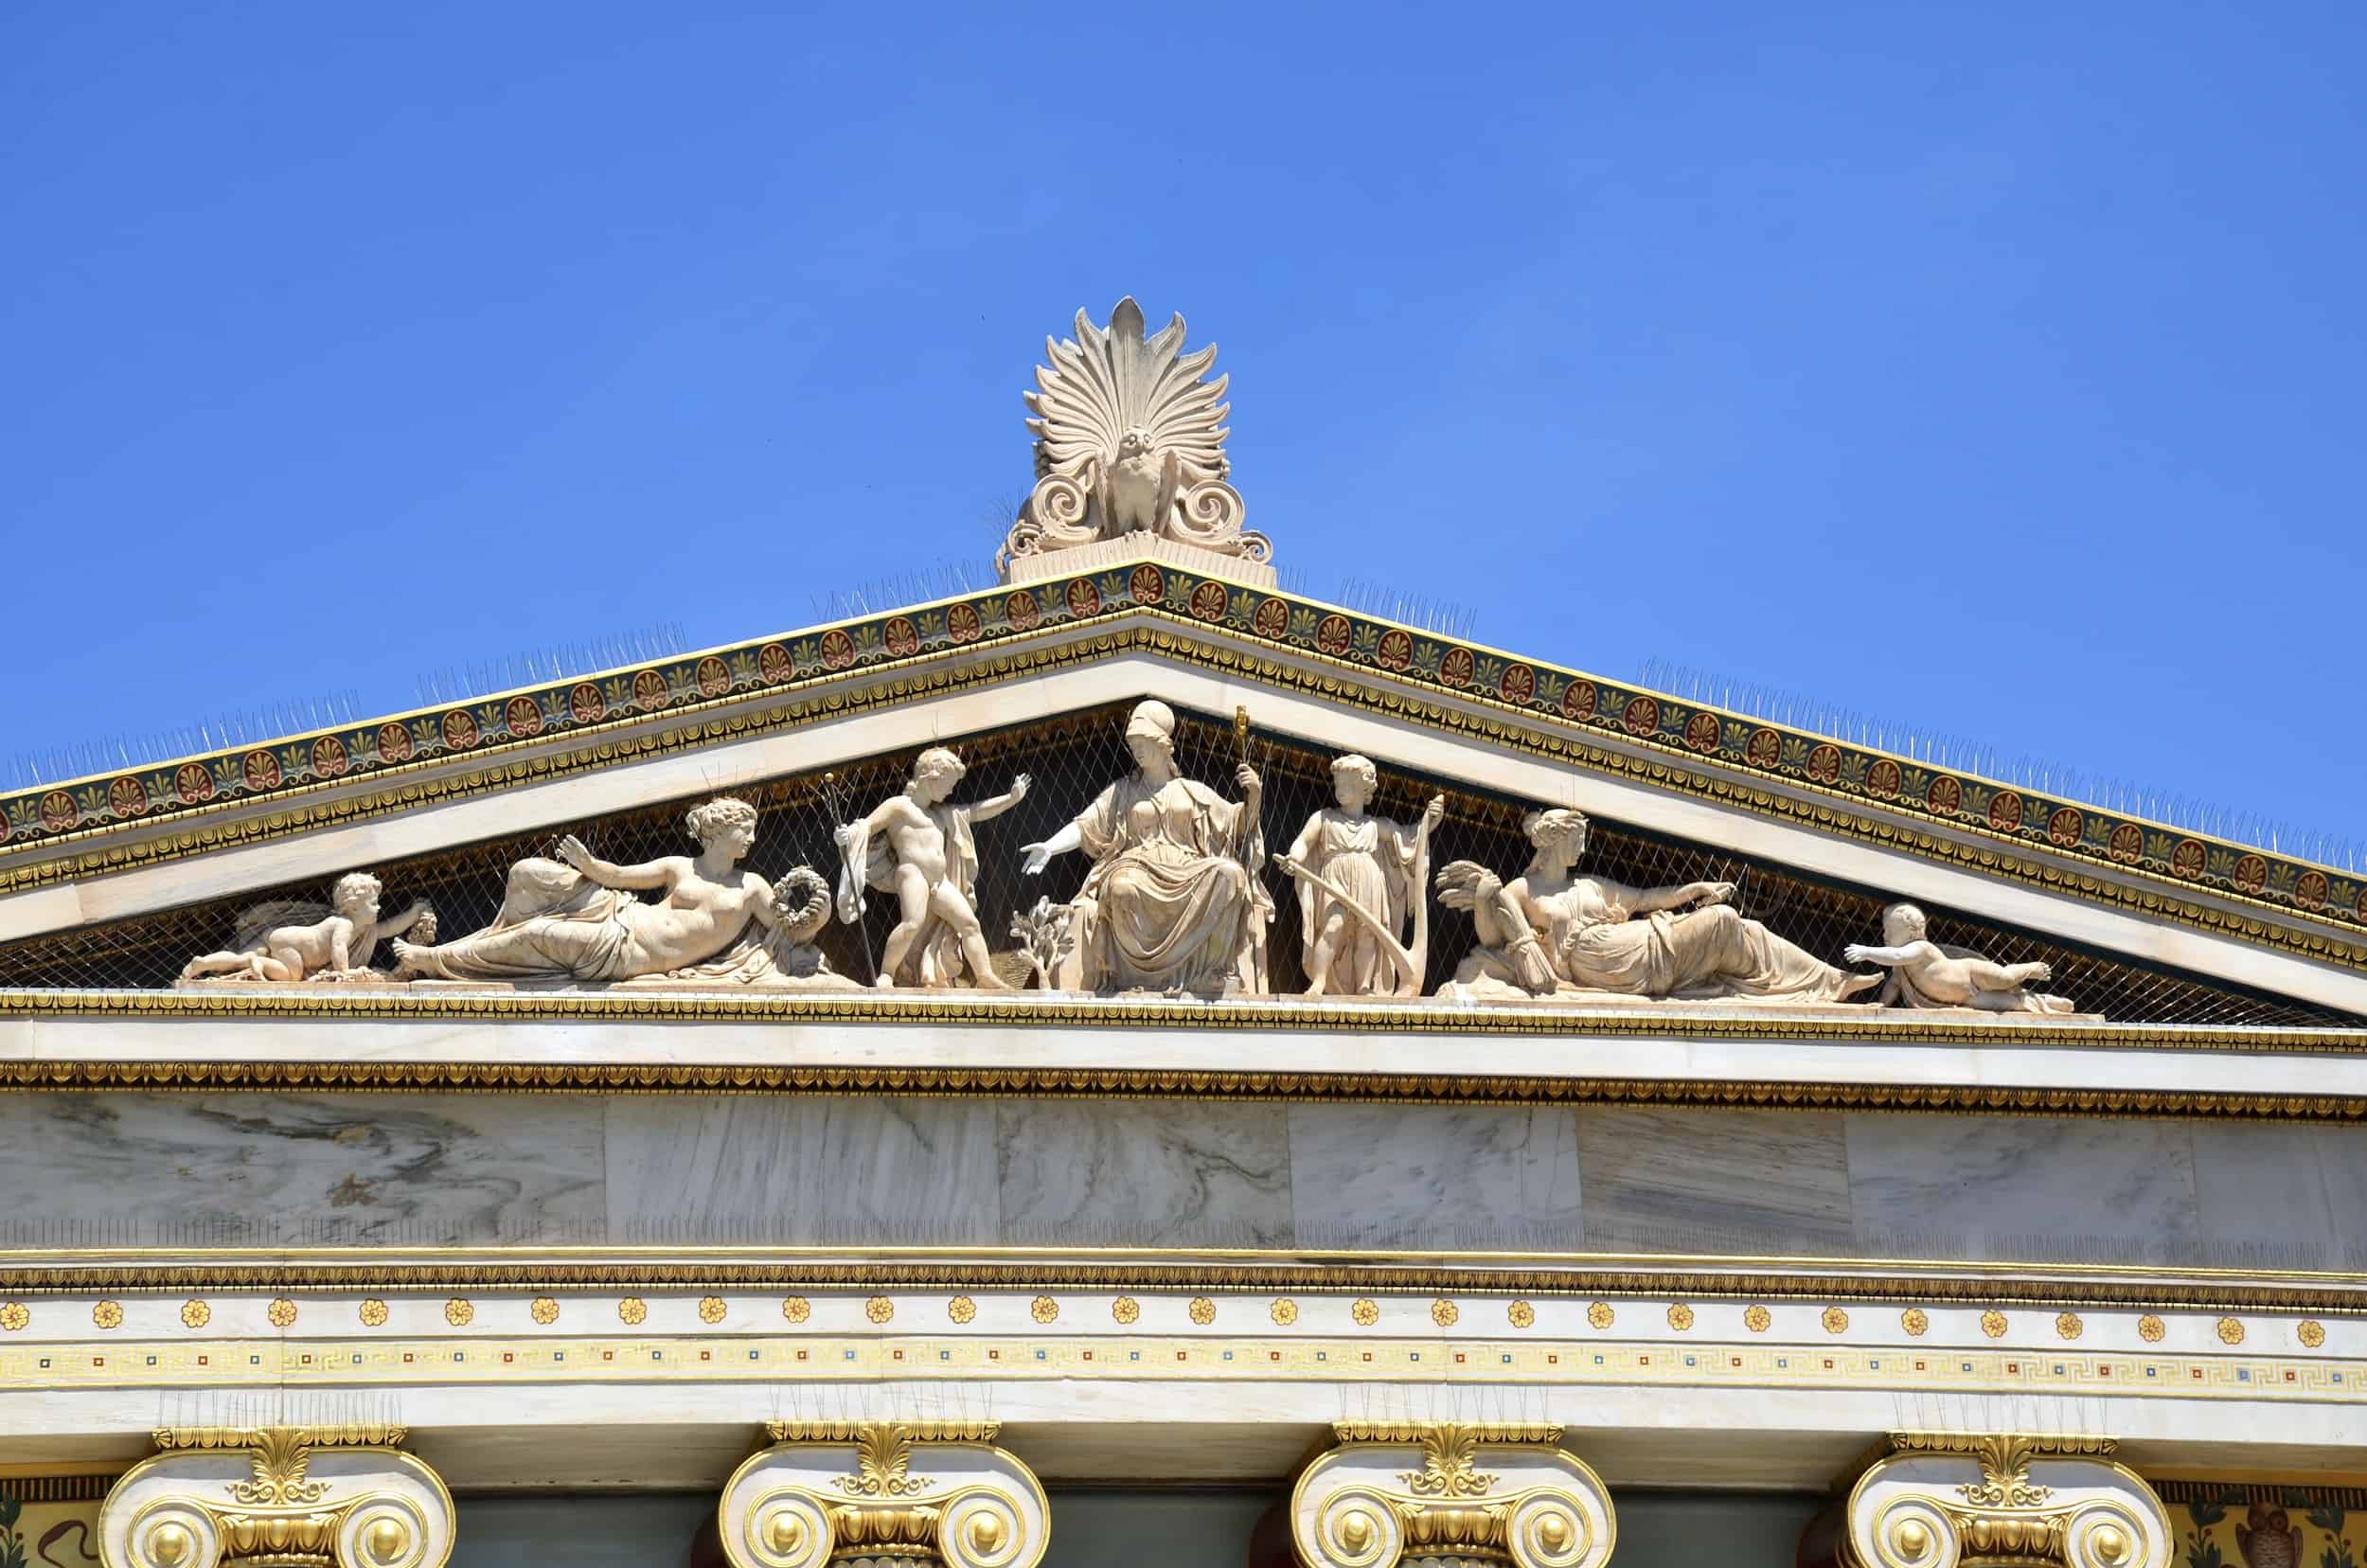 Southwest pediment of the north wing of the Academy of Athens